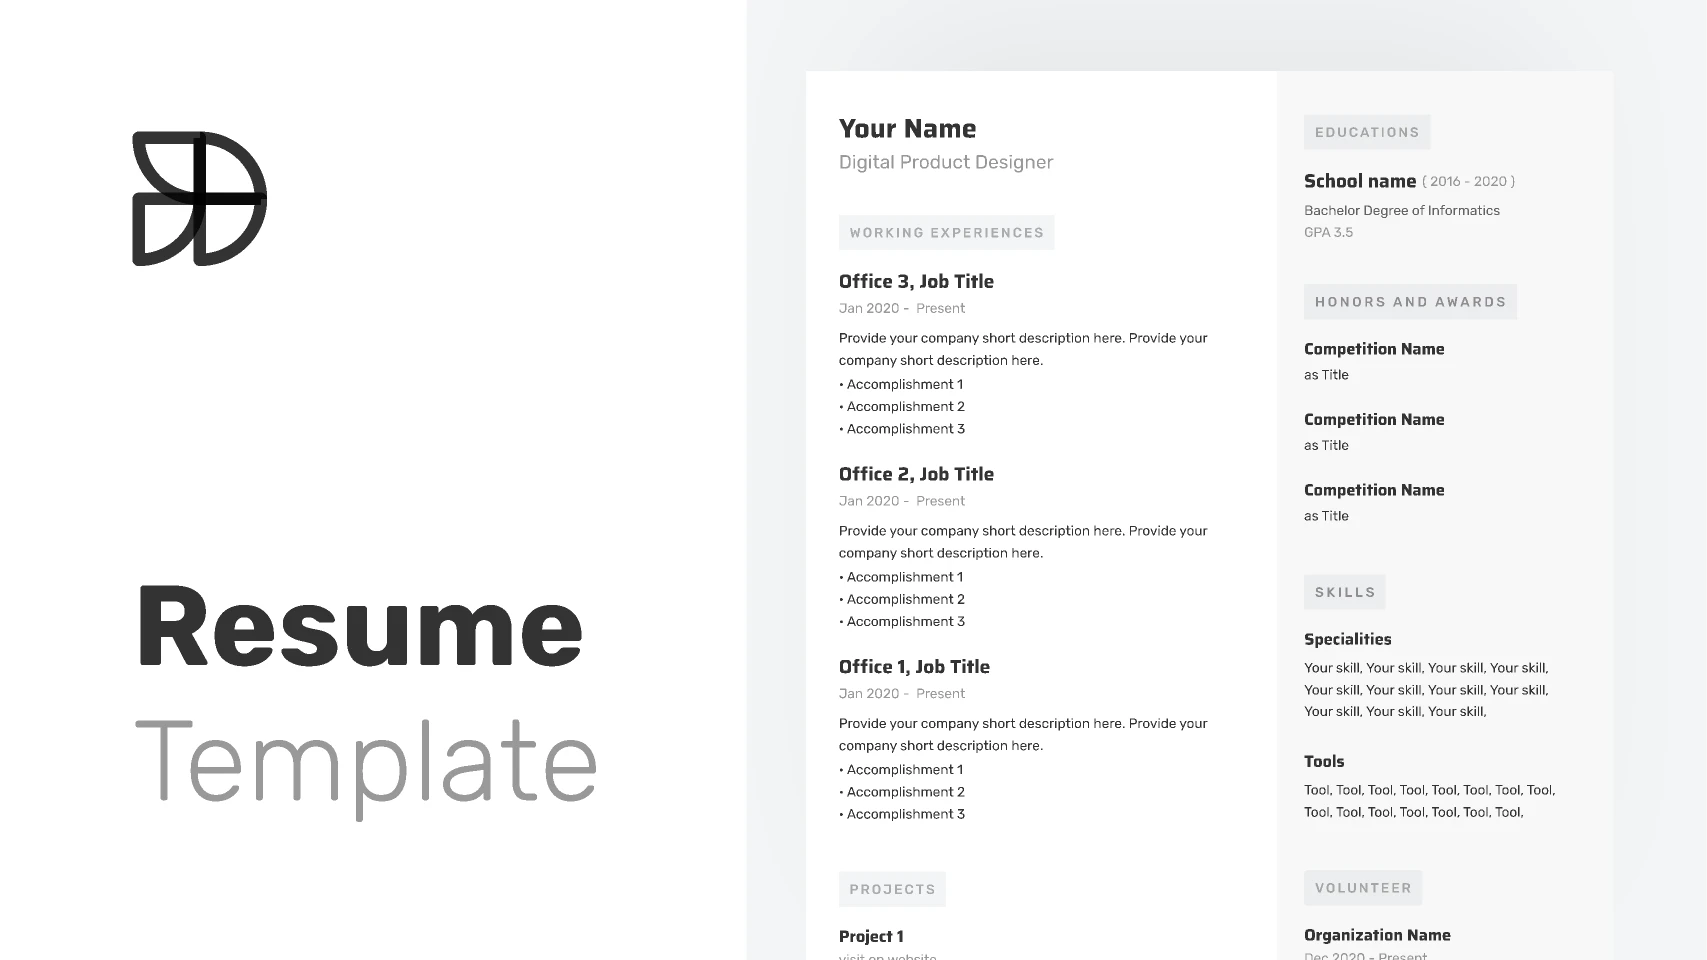 Resume Template - With Auto Layout for Figma and Adobe XD